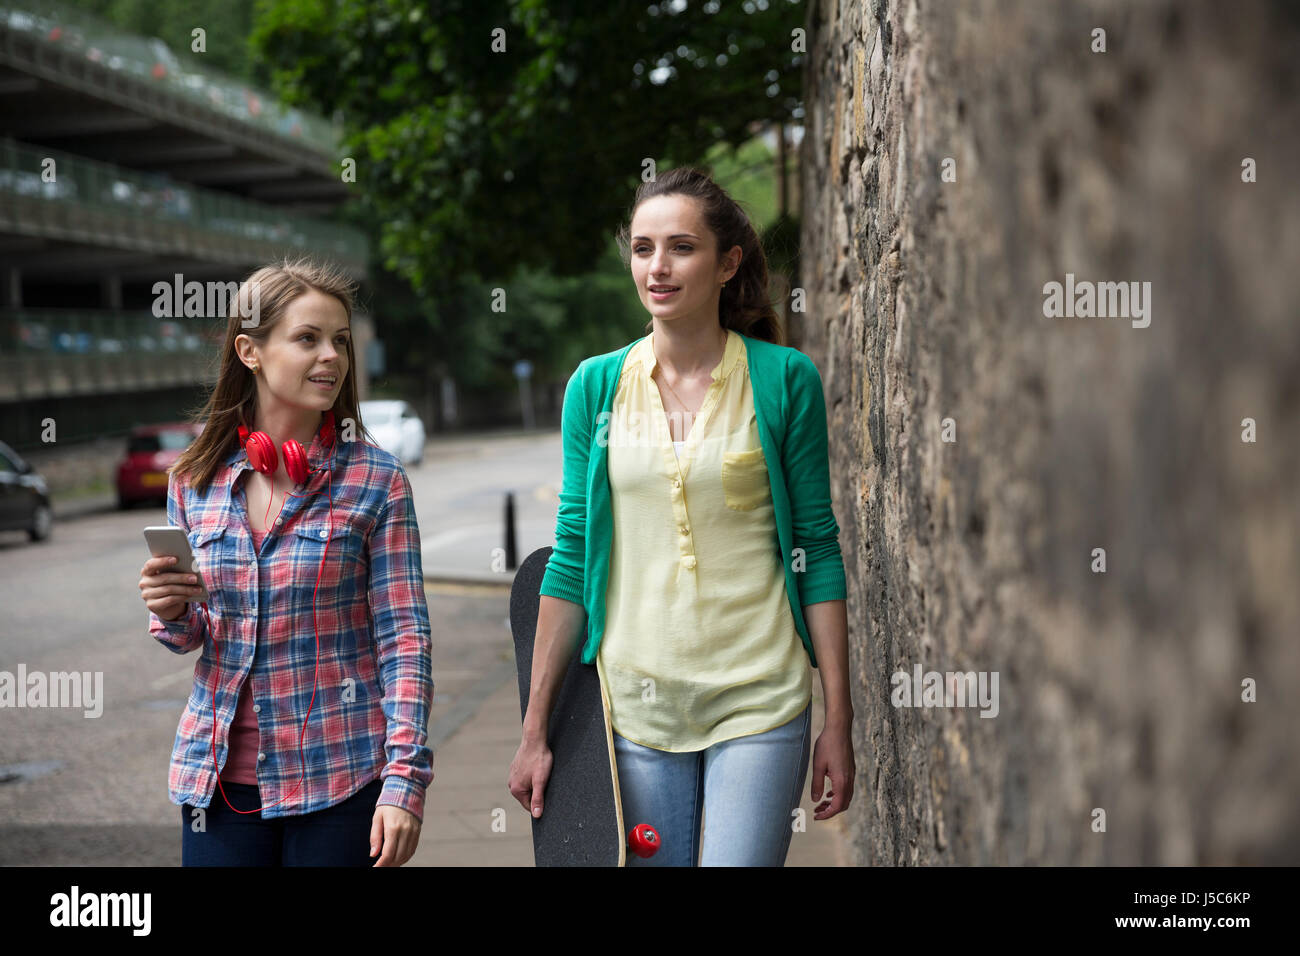 Two fashionable women walking down a city street, one with a skateboard. Stock Photo